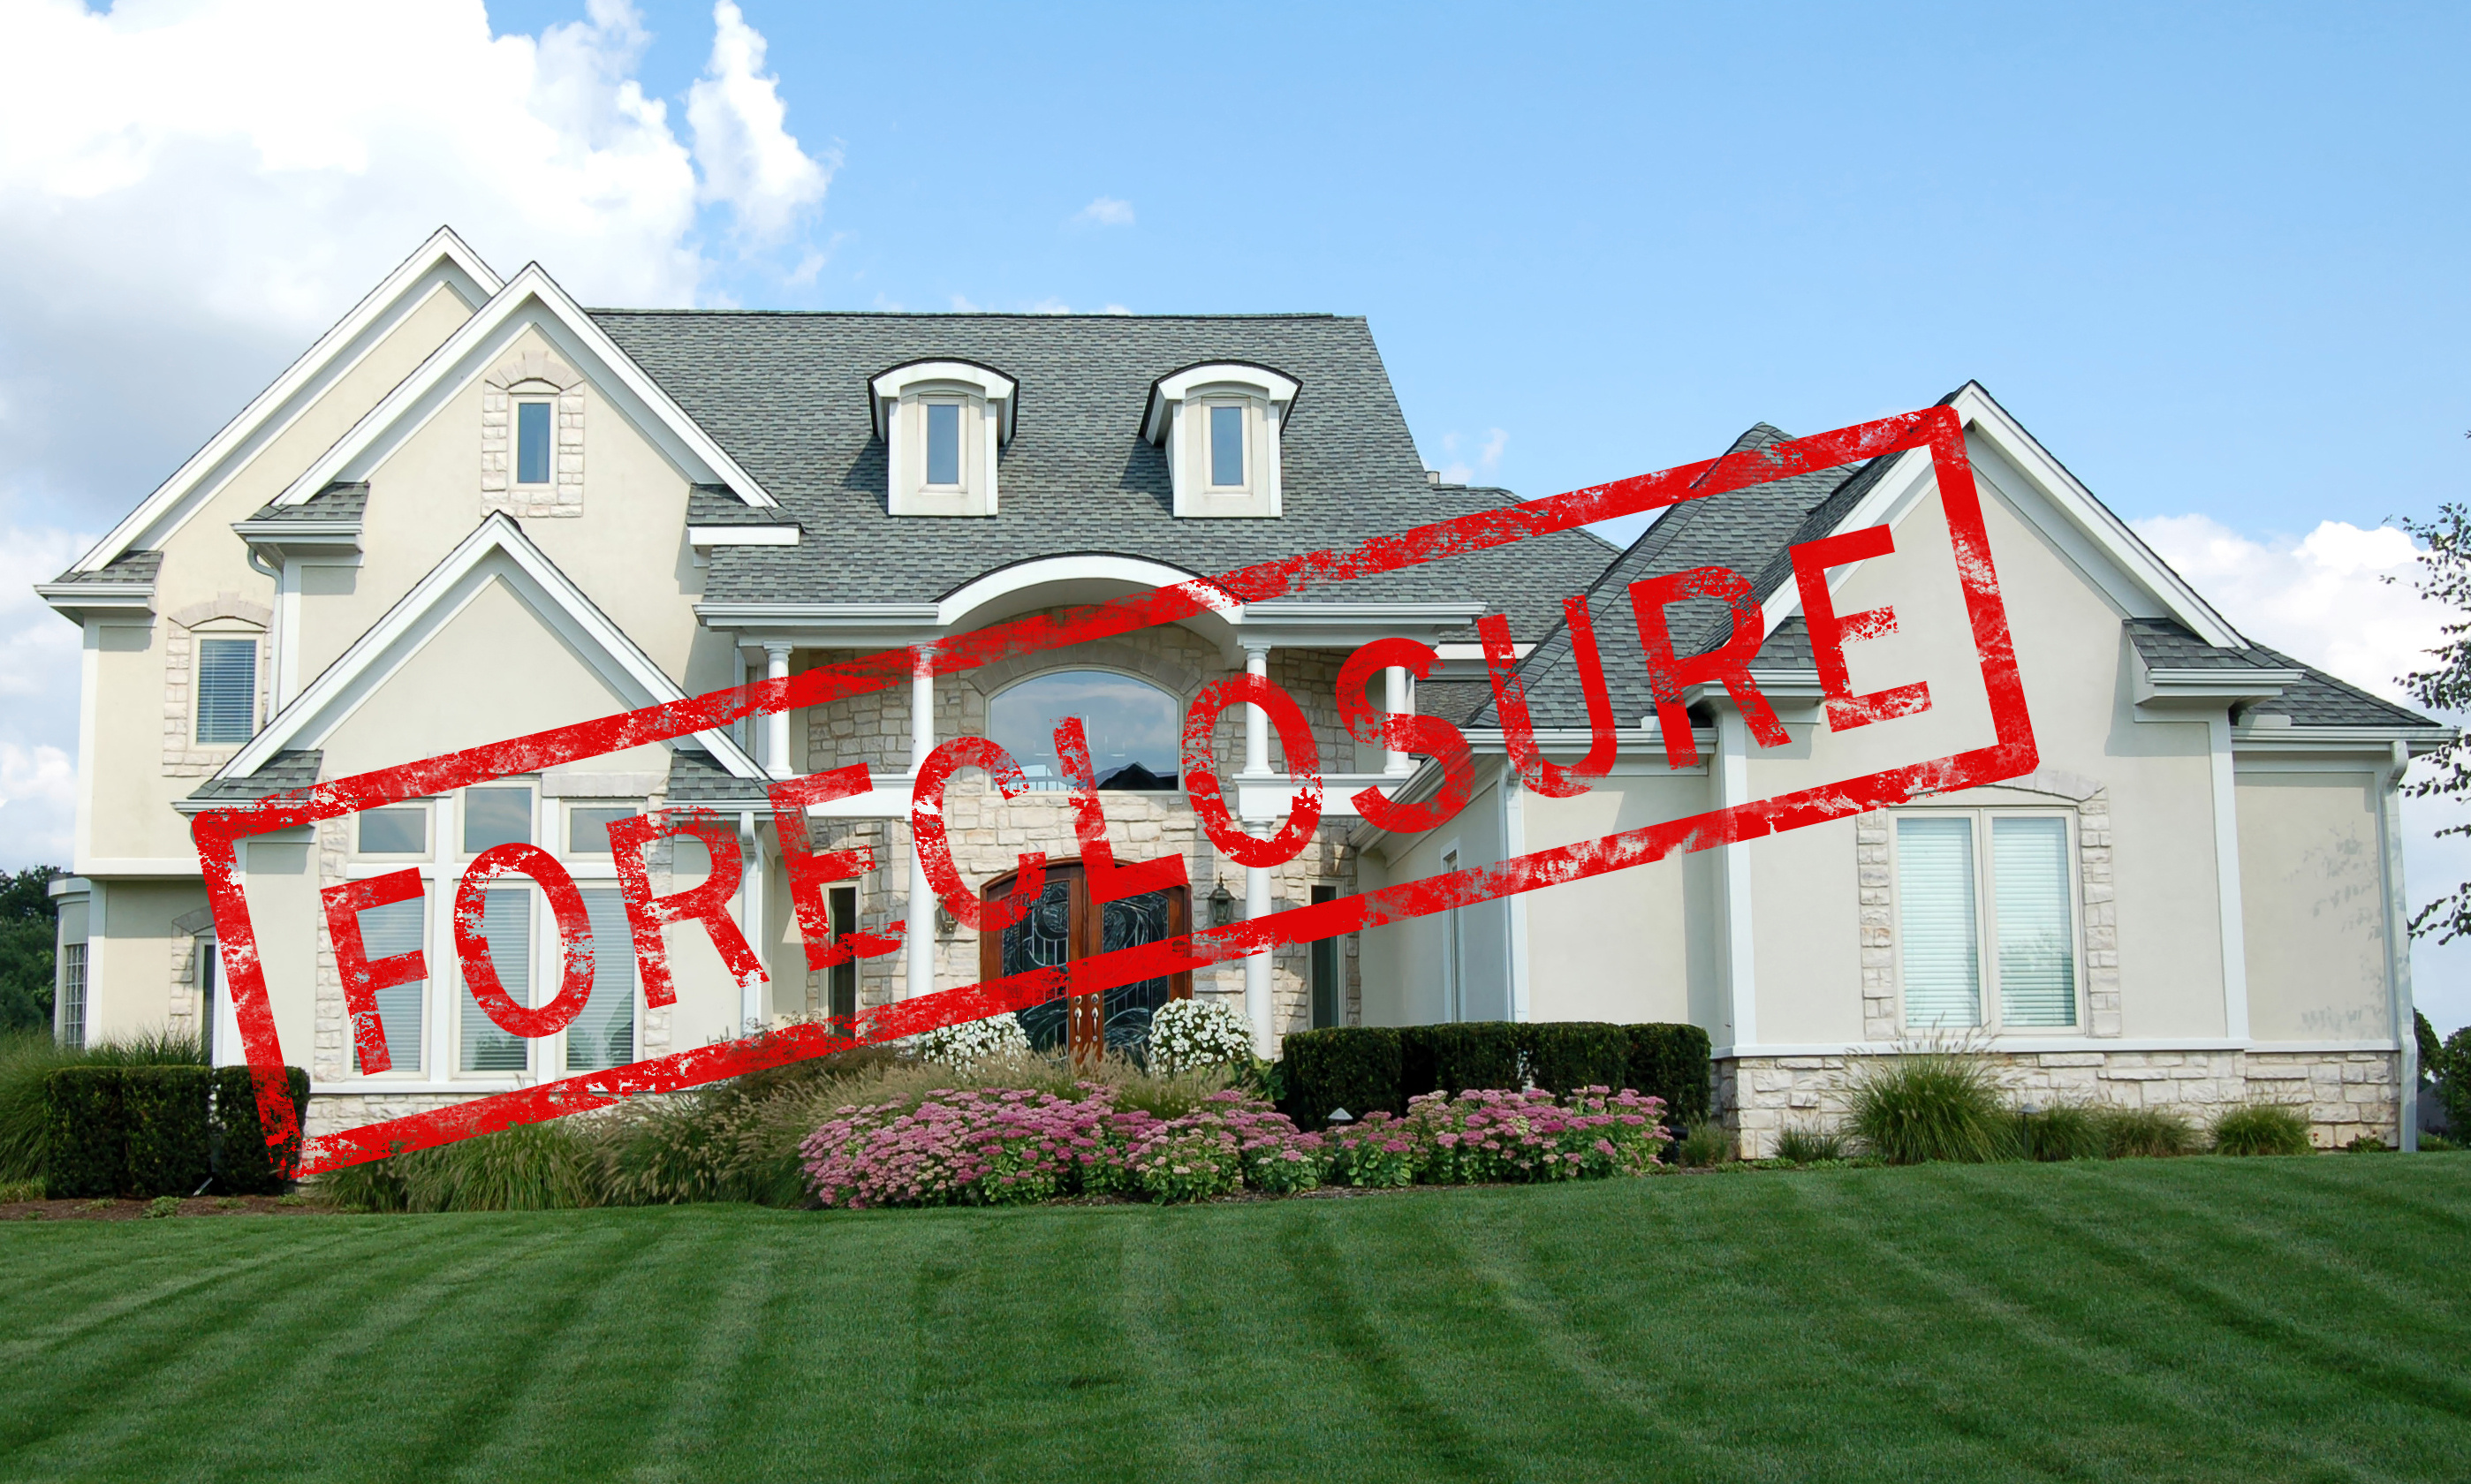 Call LOUIS FRAGALA when you need valuations pertaining to Suffolk foreclosures